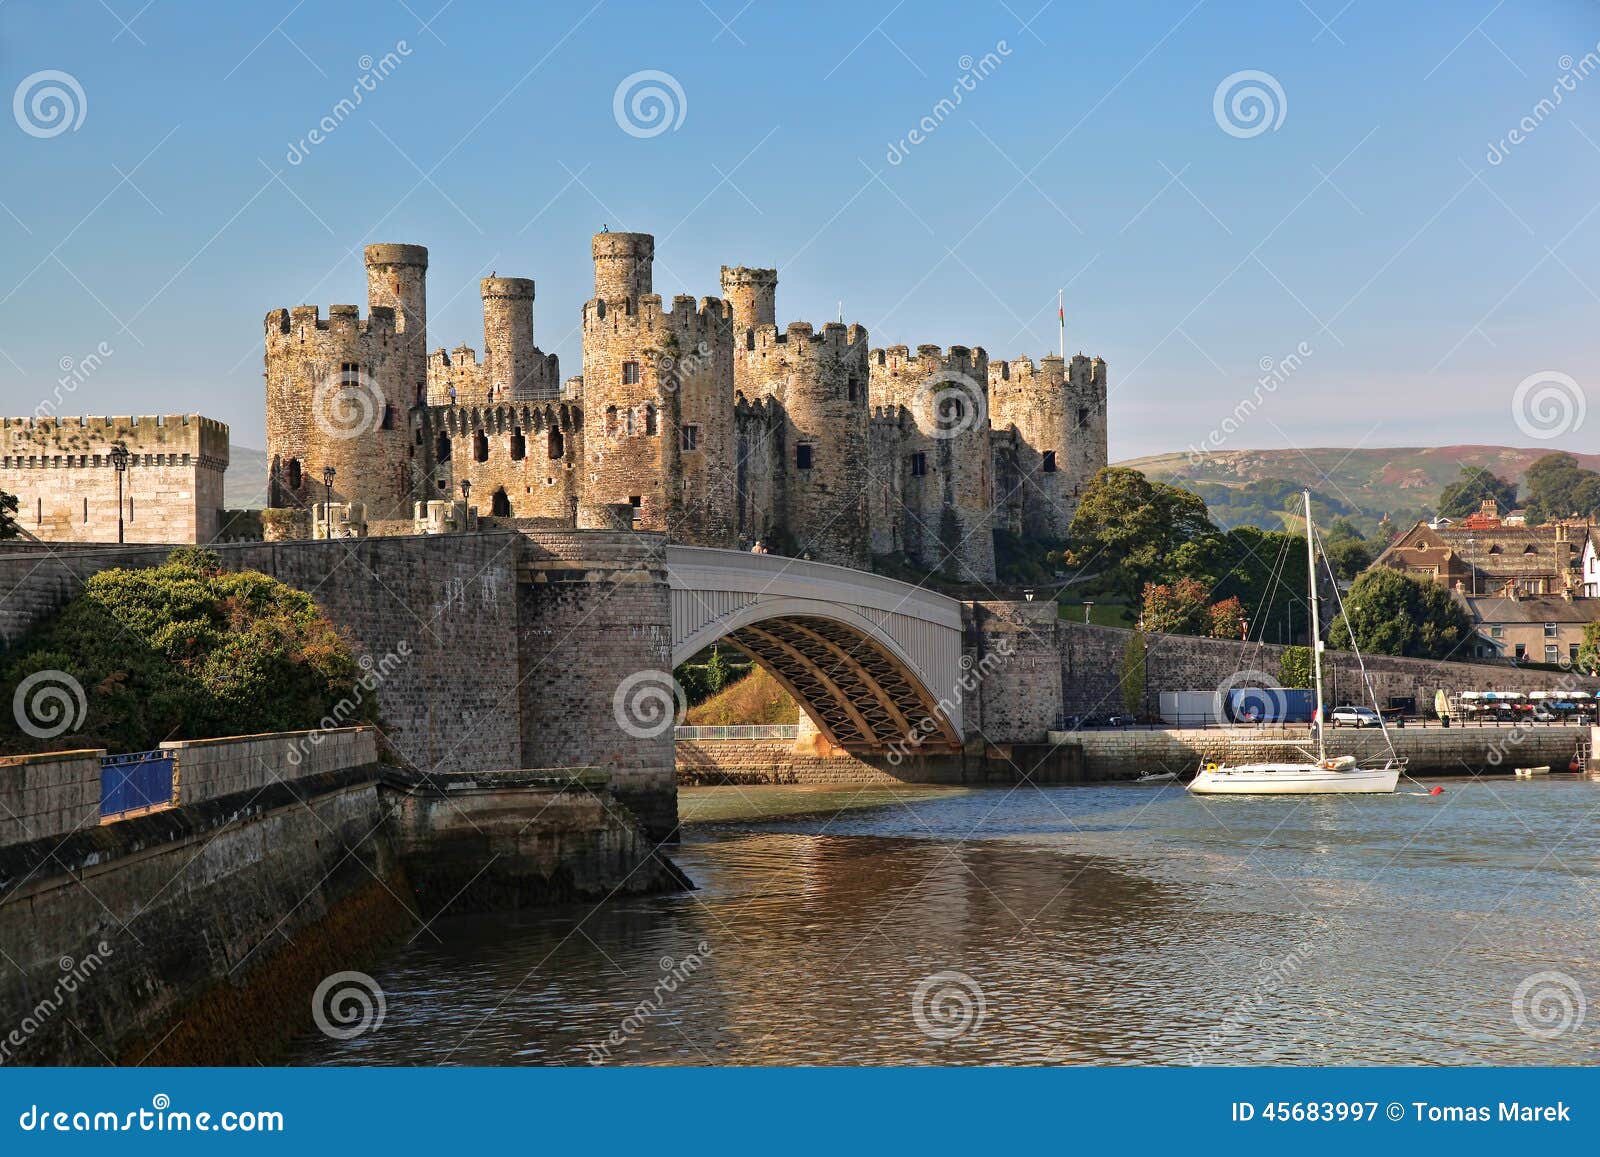 conwy castle in wales, united kingdom, series of walesh castles